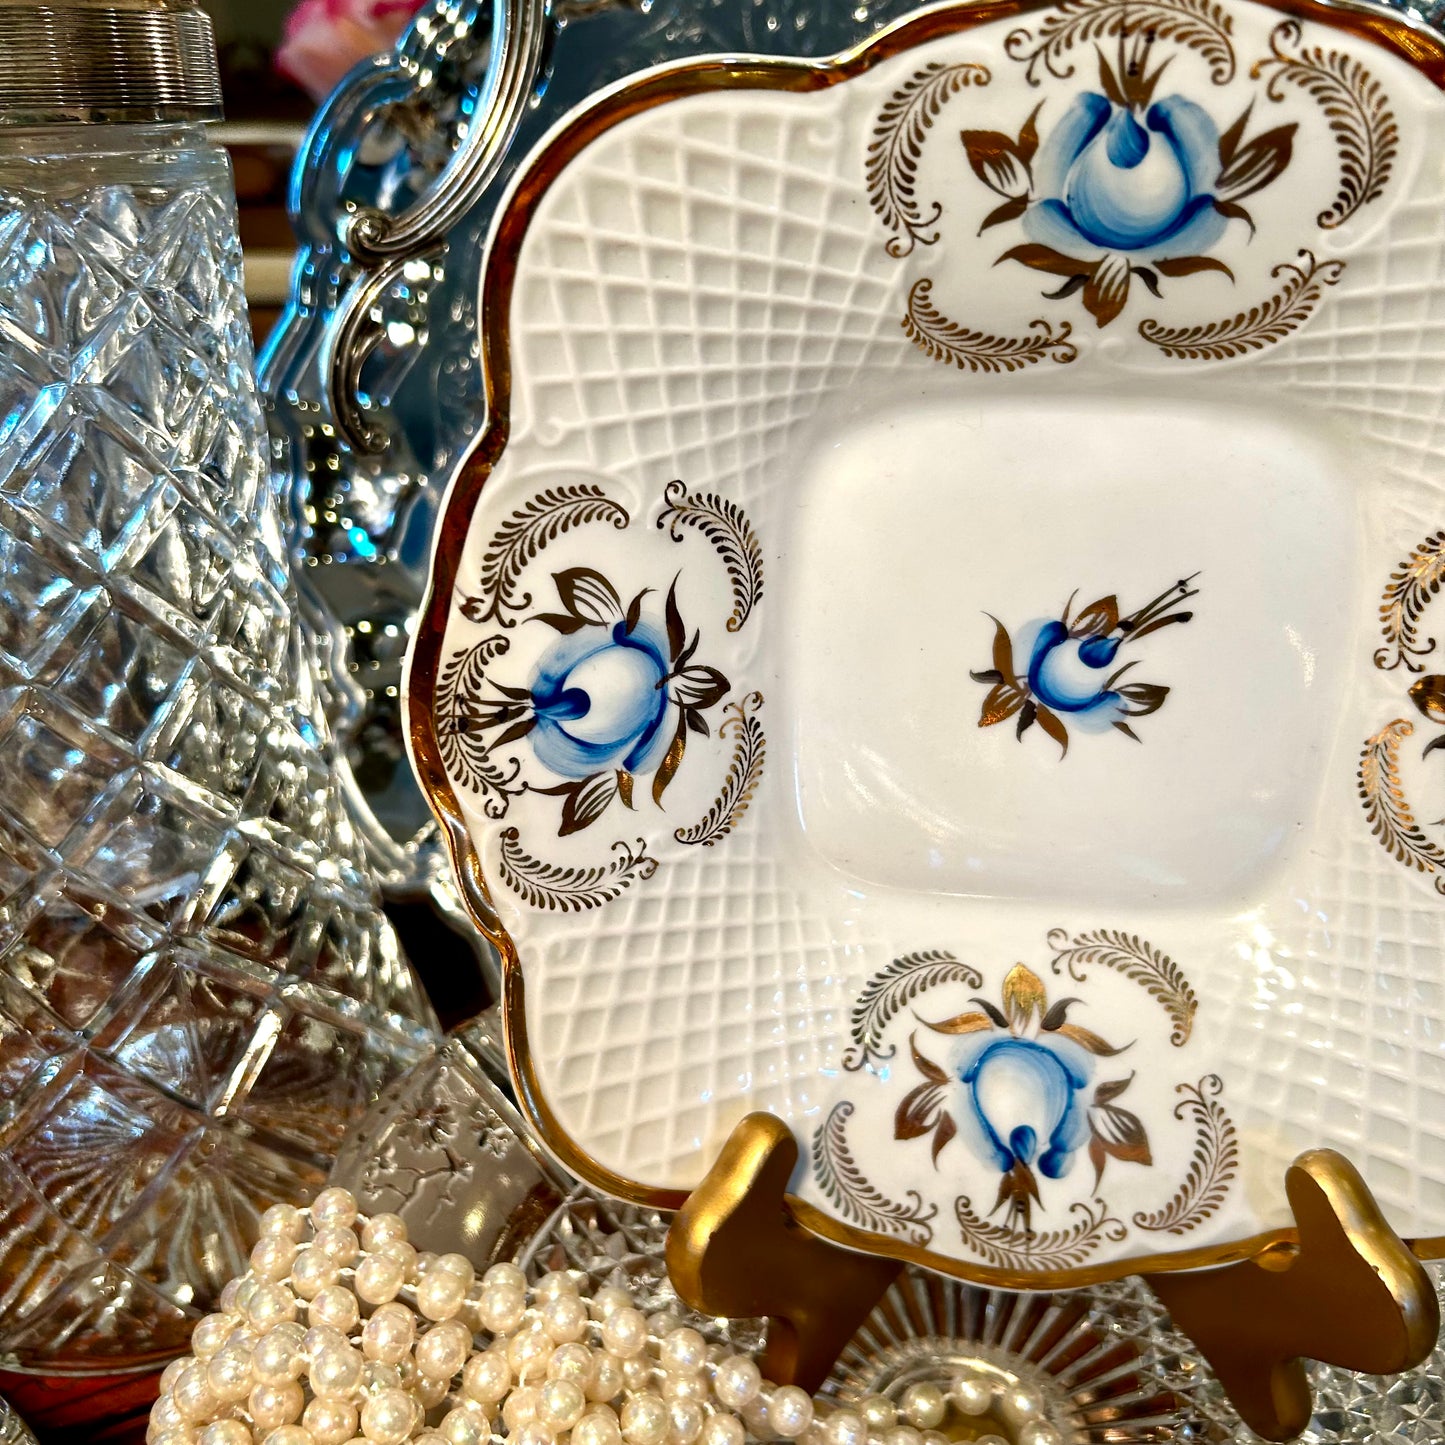 Beautiful blue and white floral lattice scalloped bowl with gold trim